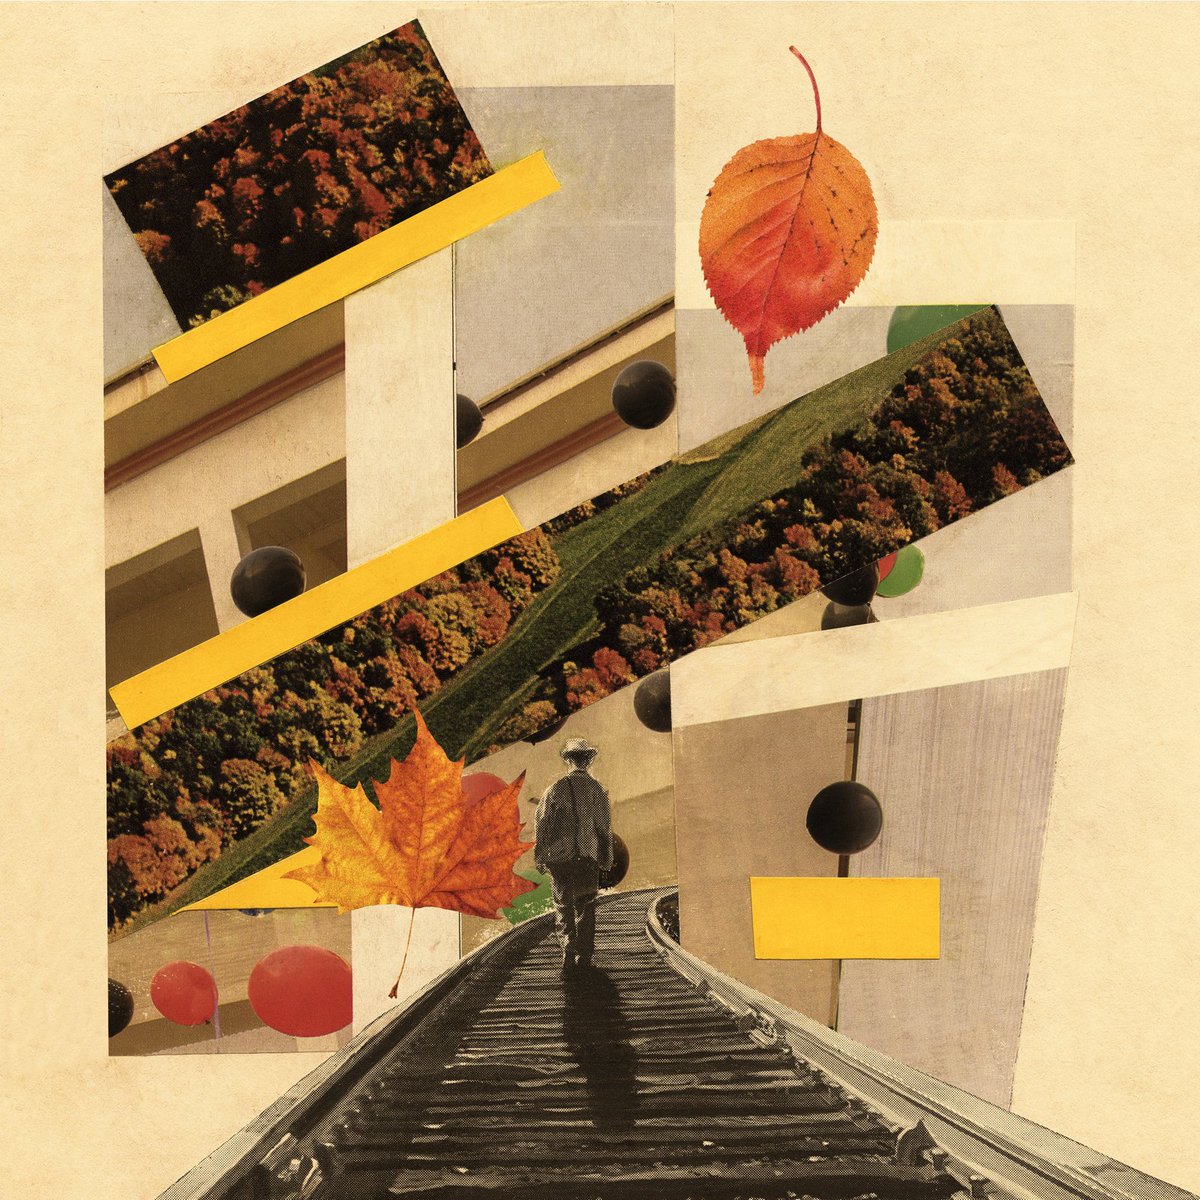 chrysjones.bandcamp.com/album/autumn-l…

Some autumn vibes for you. Should be on your favorite streaming service next week! #lofi #Autumn #beattapes

Shouts to @oddisee @jakeuno @swoope @Alchemist @kanyewest  Wes Pendleton, and many others for influencing me as a producer!